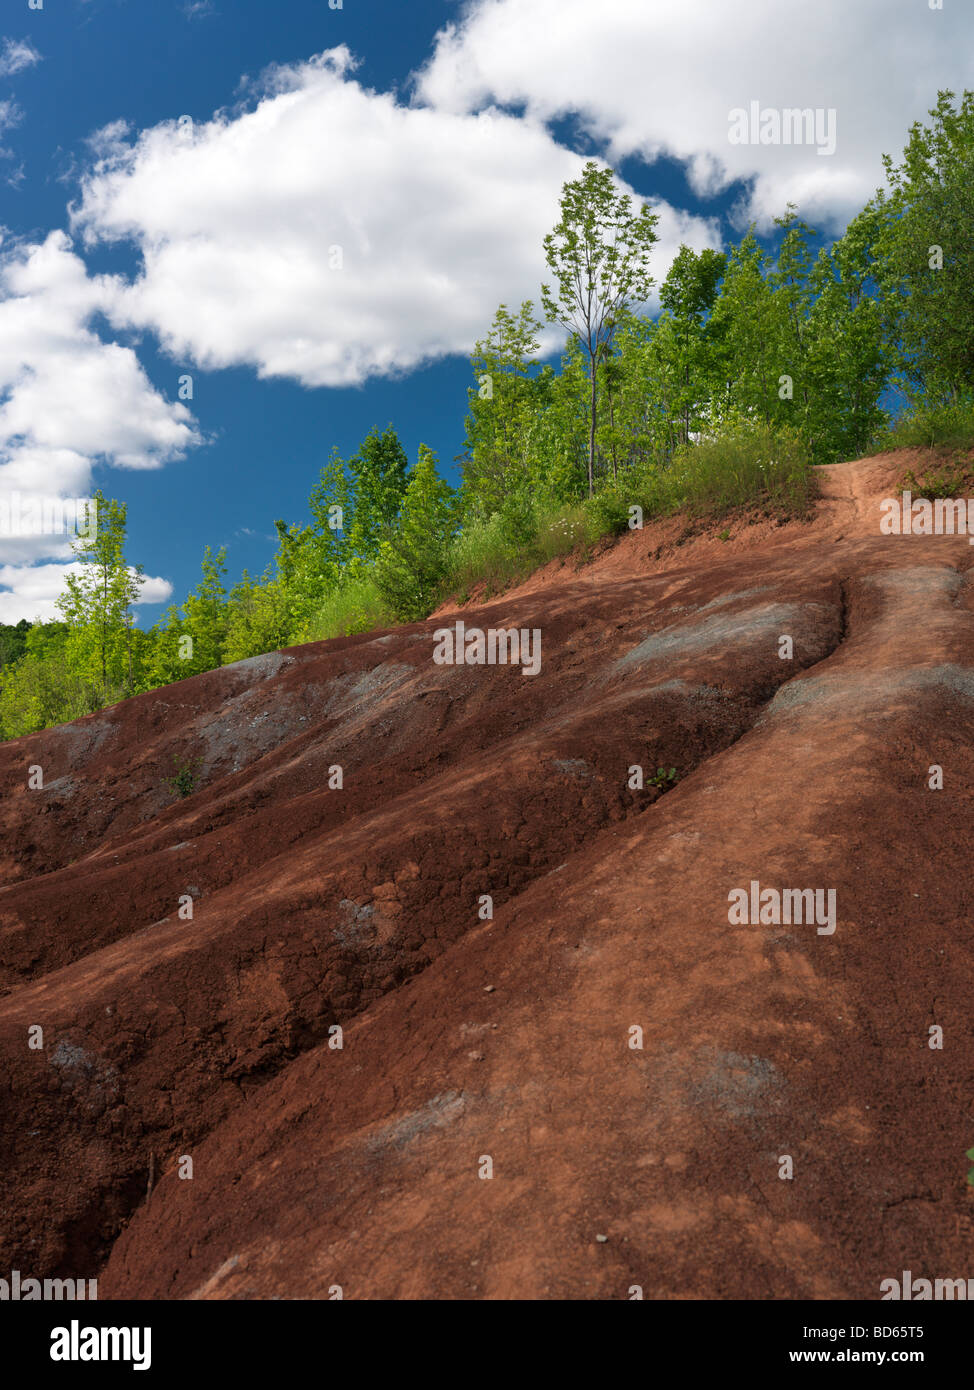 Badlands landscape formed by red and gray dry eroded clay Stock Photo